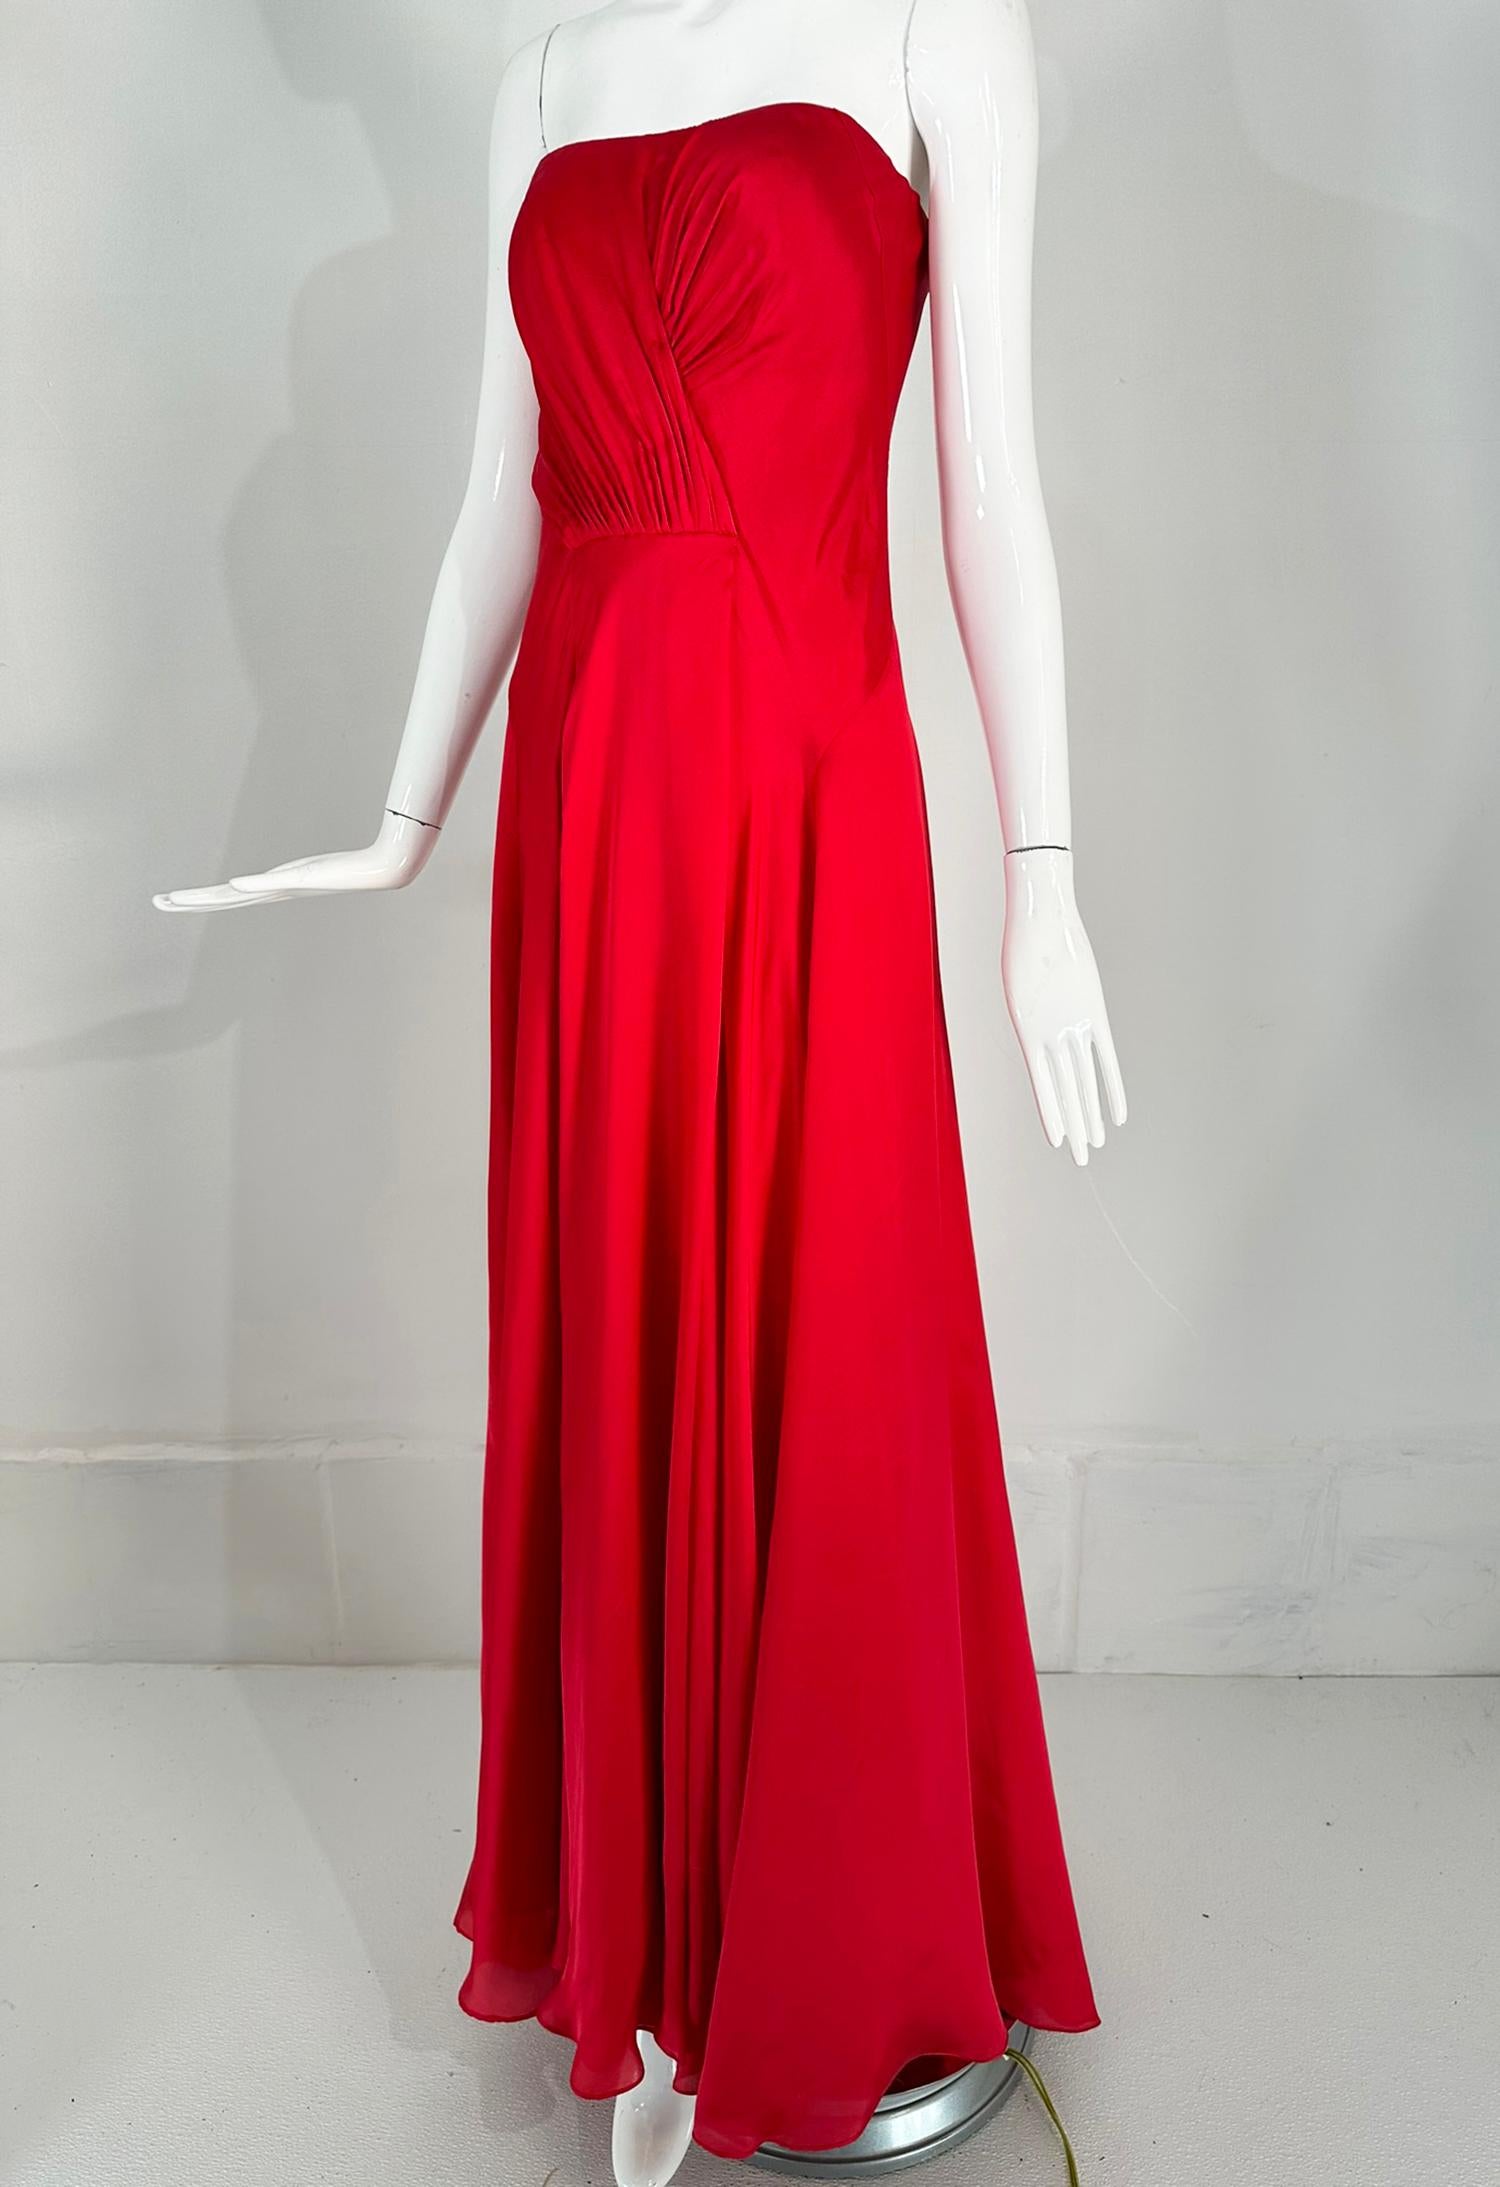 Ralph Lauren Collection Draped Red Silk Strapless Evening Gown 6 In Good Condition For Sale In West Palm Beach, FL